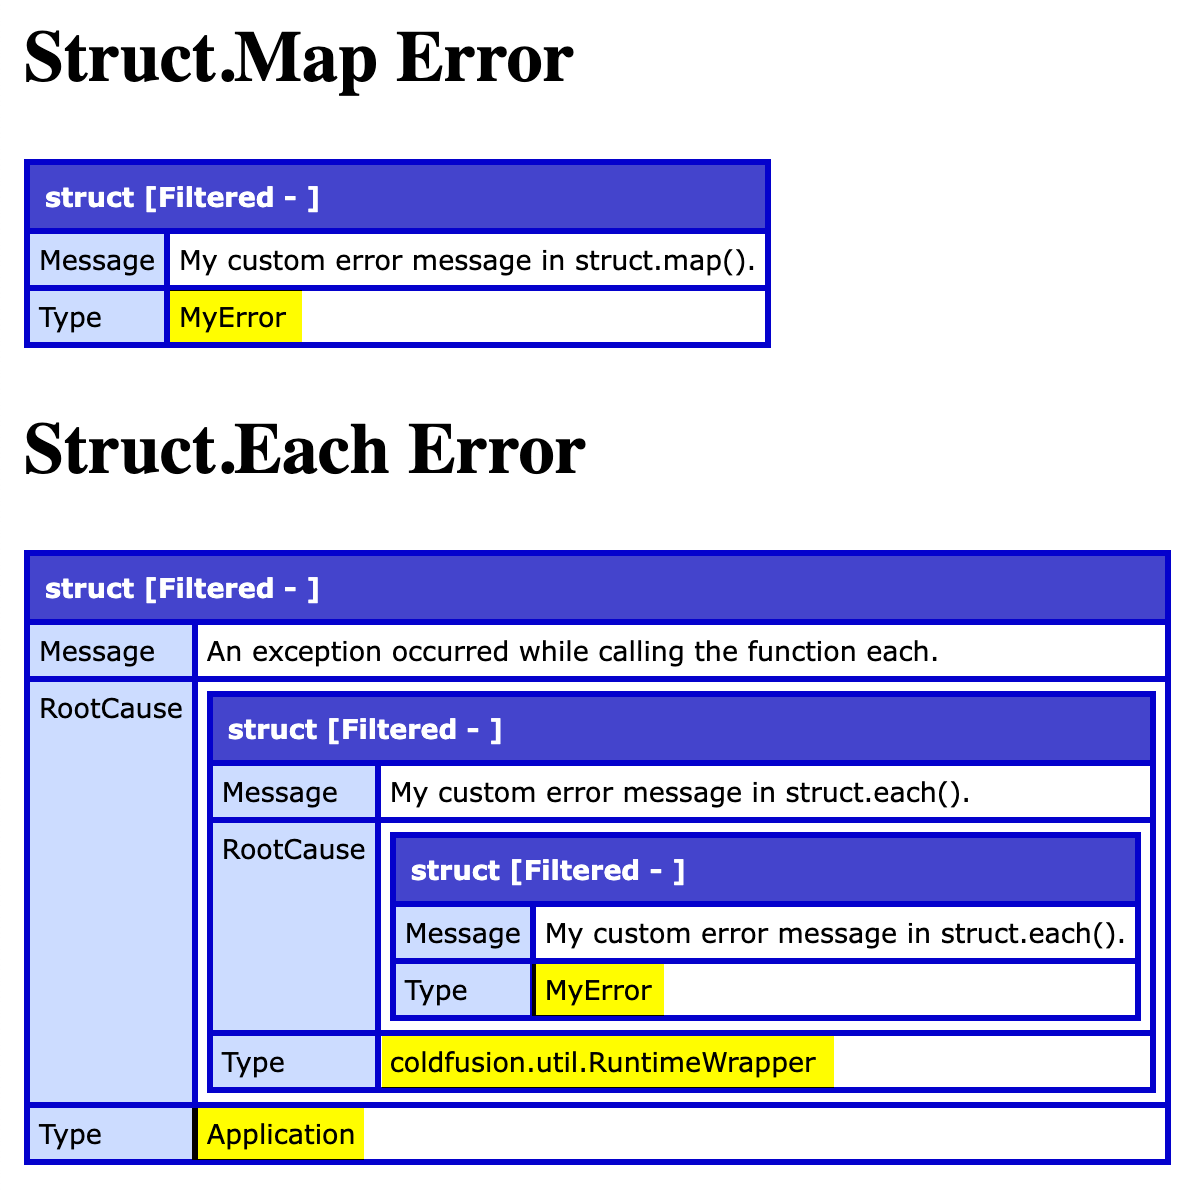 Two ColdFusion error structures shown next to each other, the first for Struct.Map and the second for Struct.Each.